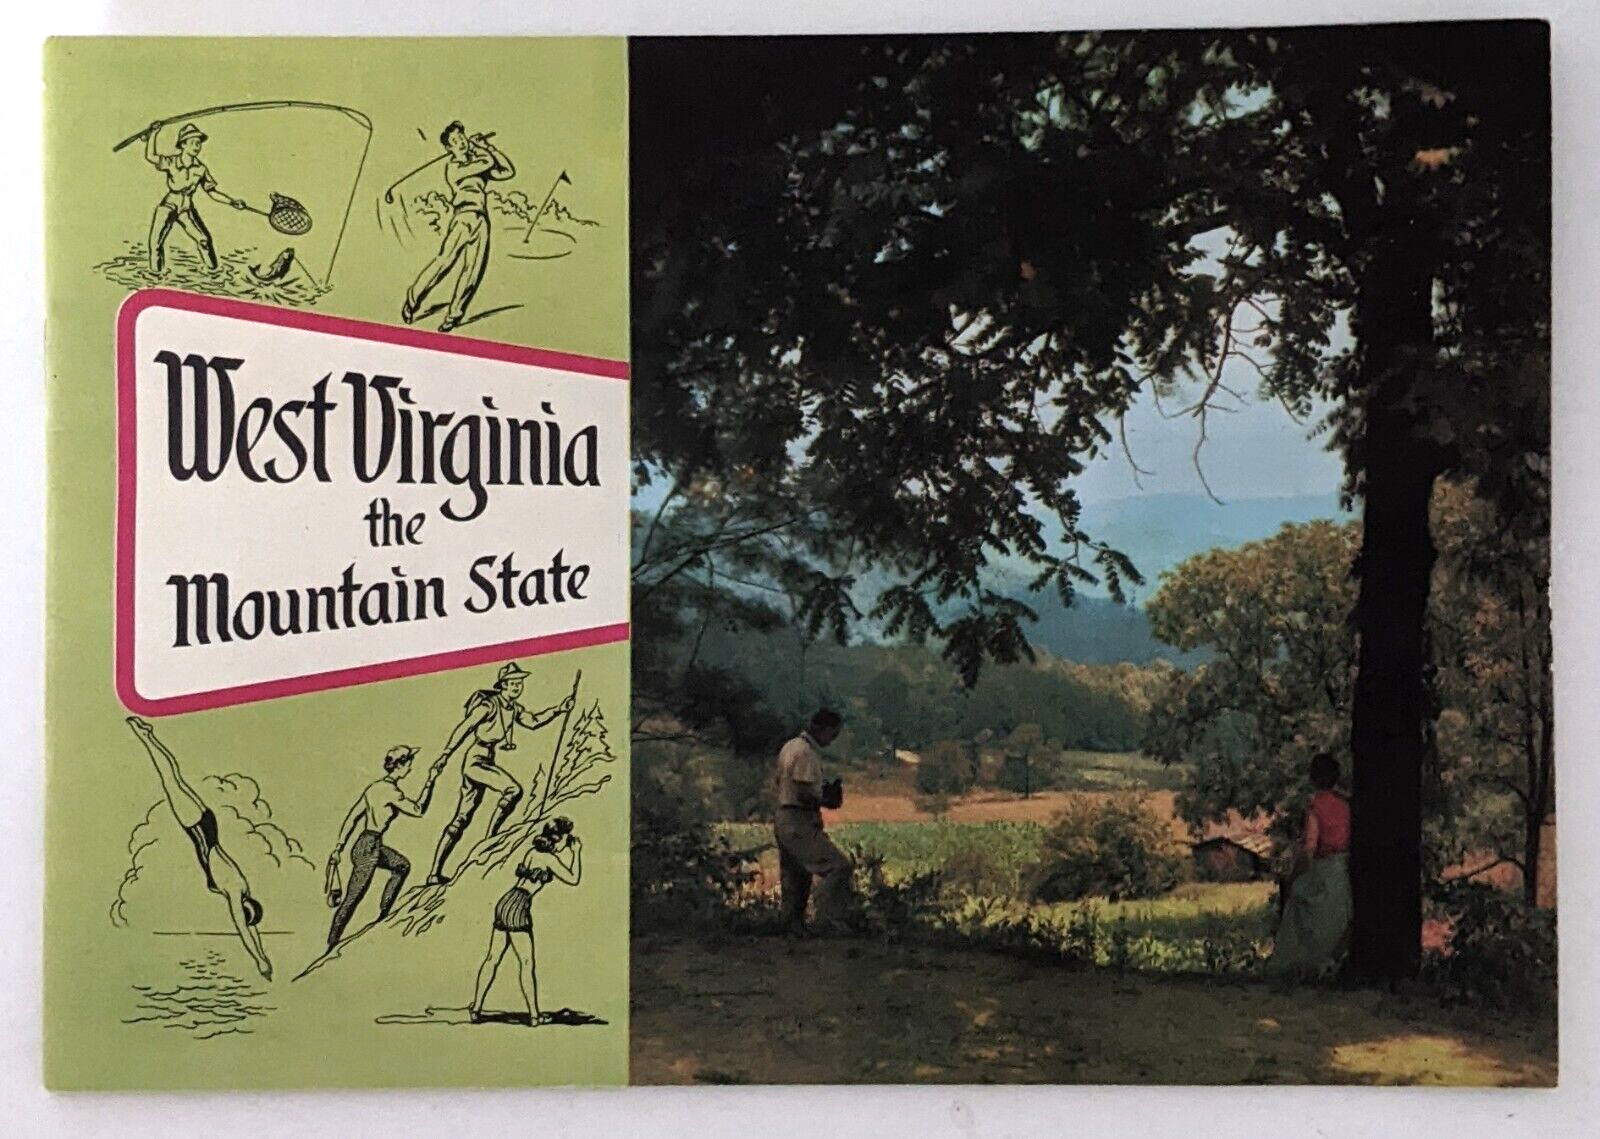 1957 West Virginia The Mountain State Vintage Travel Guide Booklet Tourist Sites